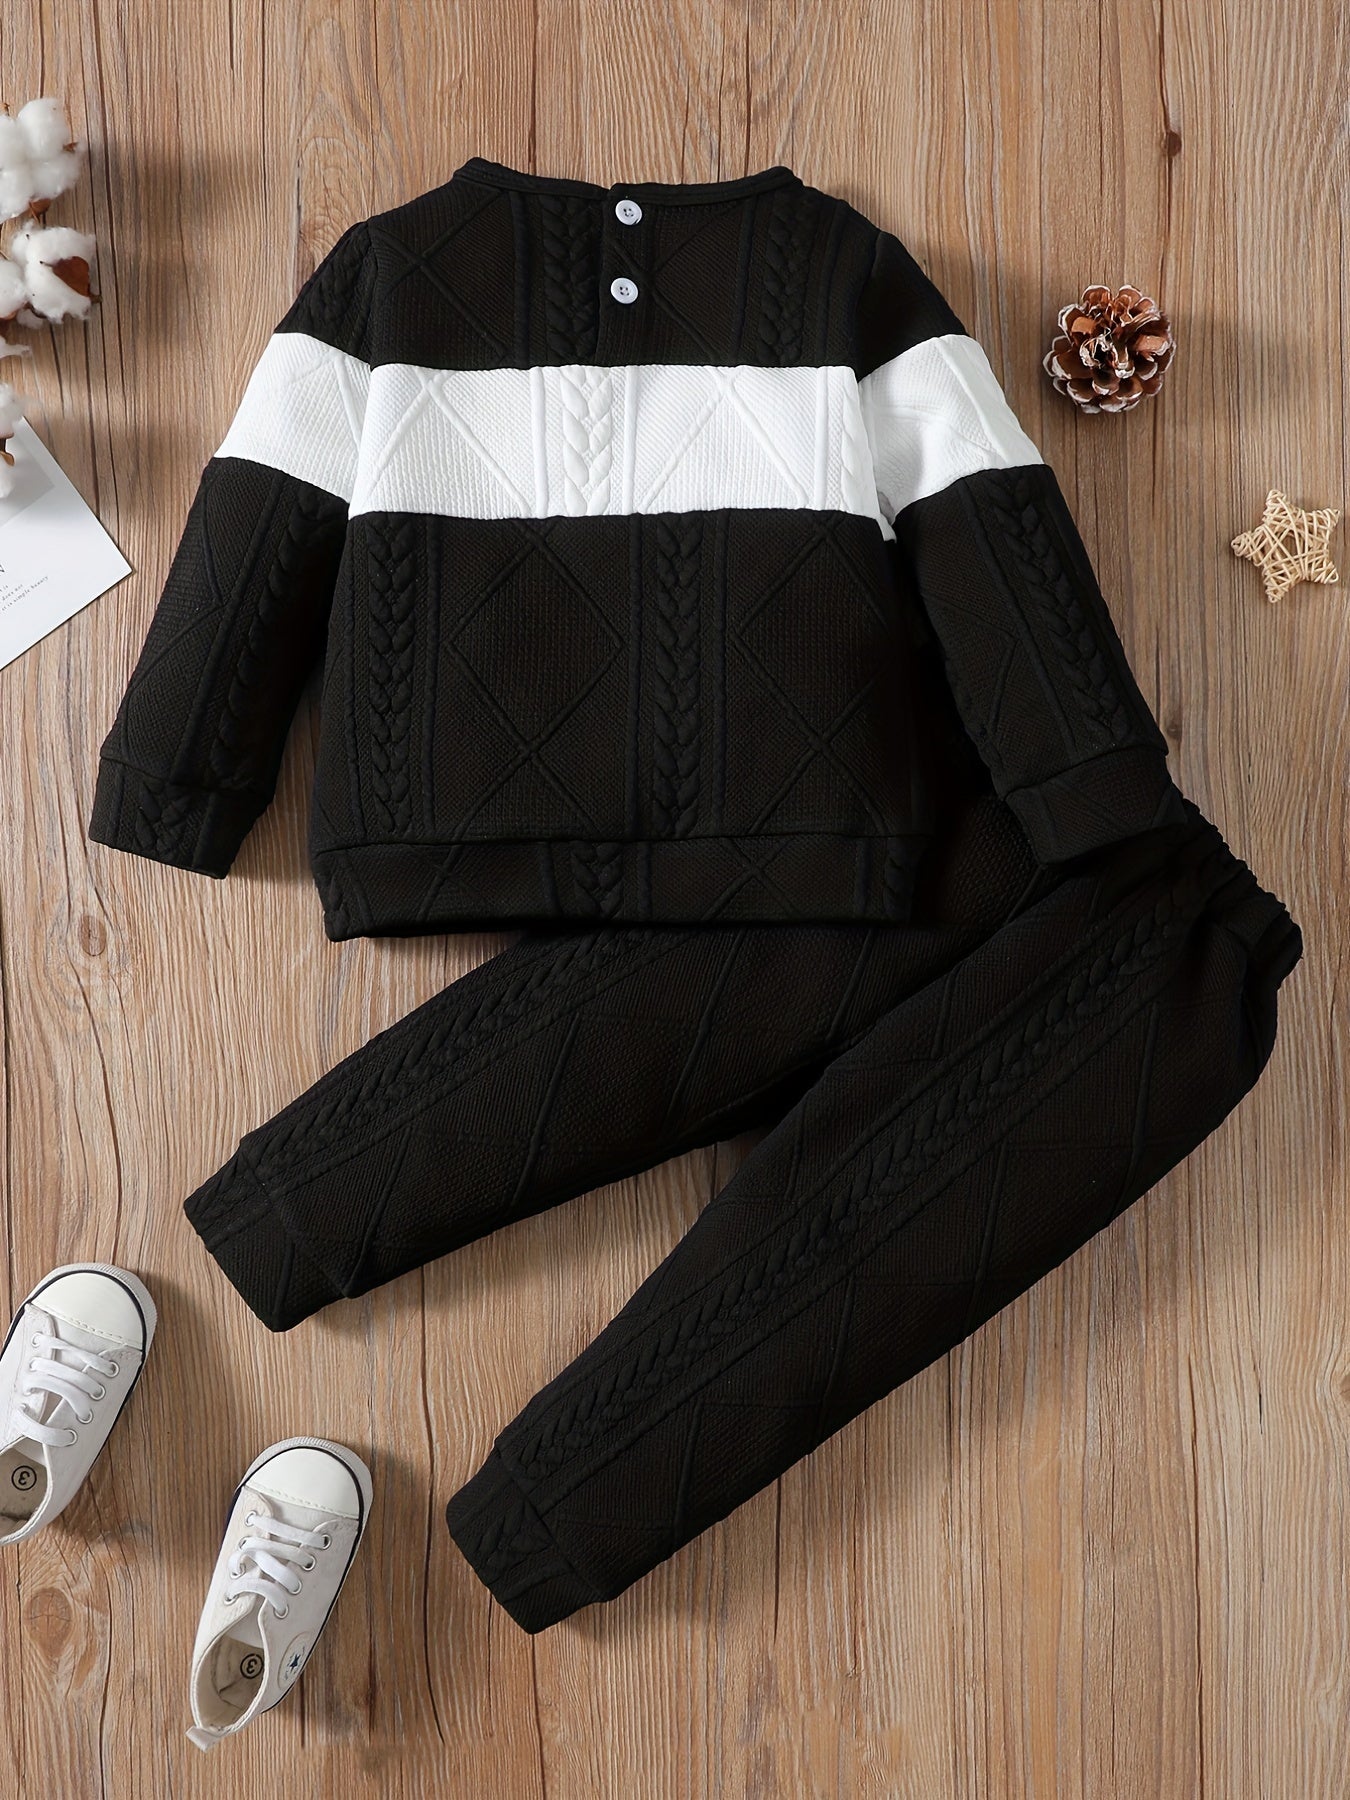 Boys Casual Knitted Color Block Pullover Top & Pants 2pcs Set Kids Clothes Autumn And Winter